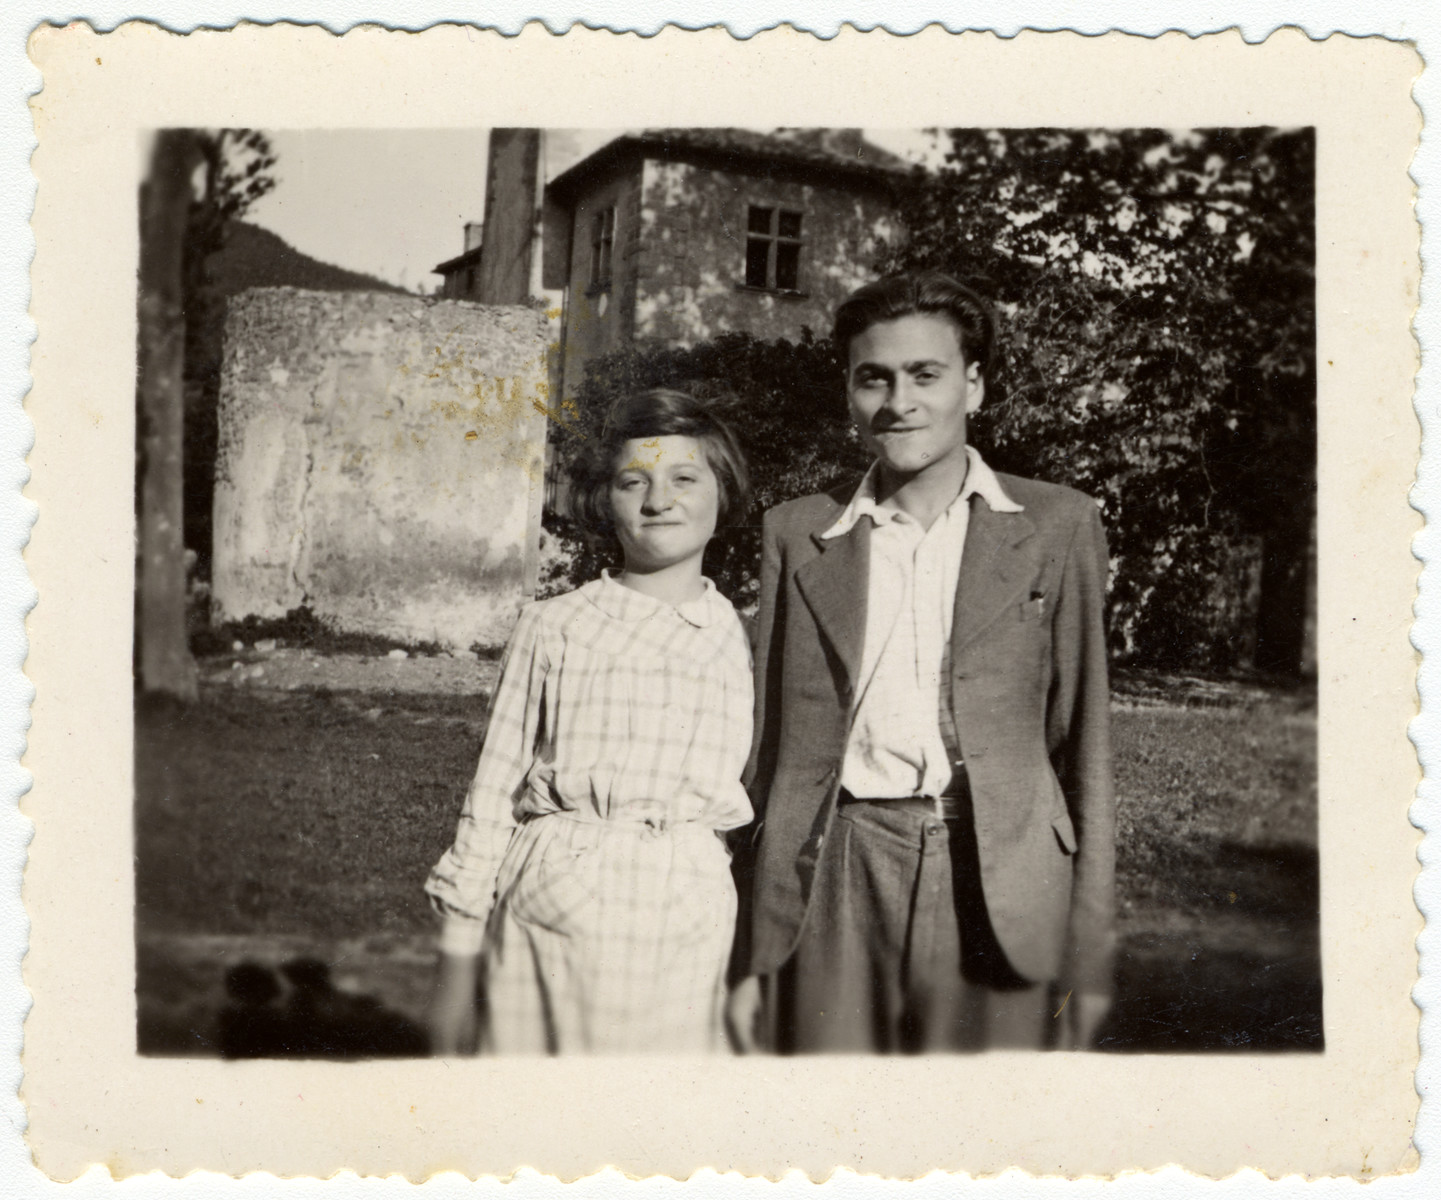 Two siblings stand in front of the children's home of Chateau de la Hille.

Pictured are Martha and Heinz Storosum.